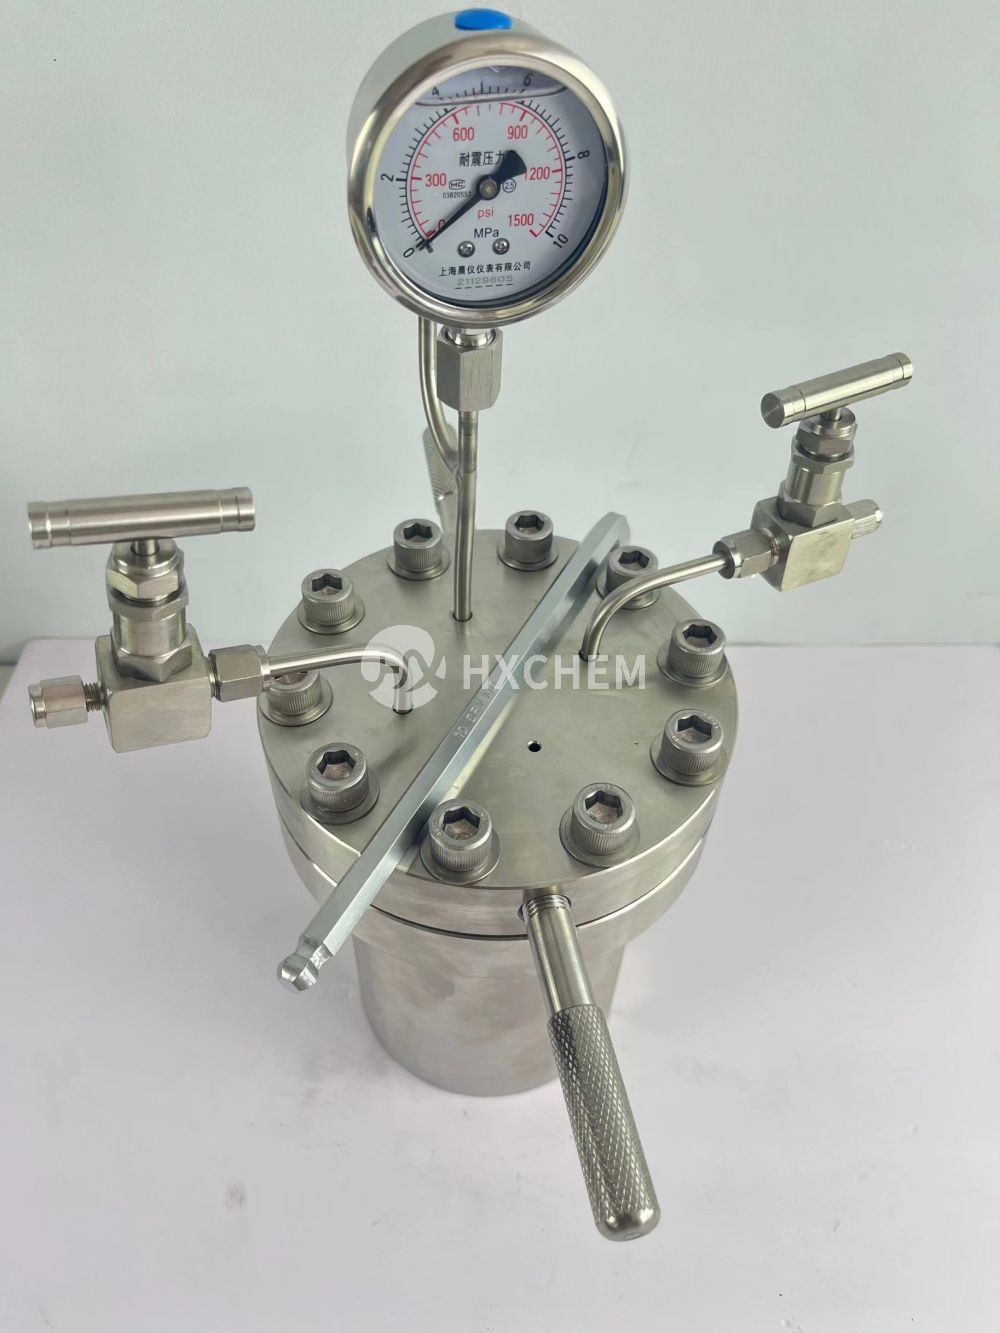 Bench top flange connect laboratory pressure reactor with PTFE liner